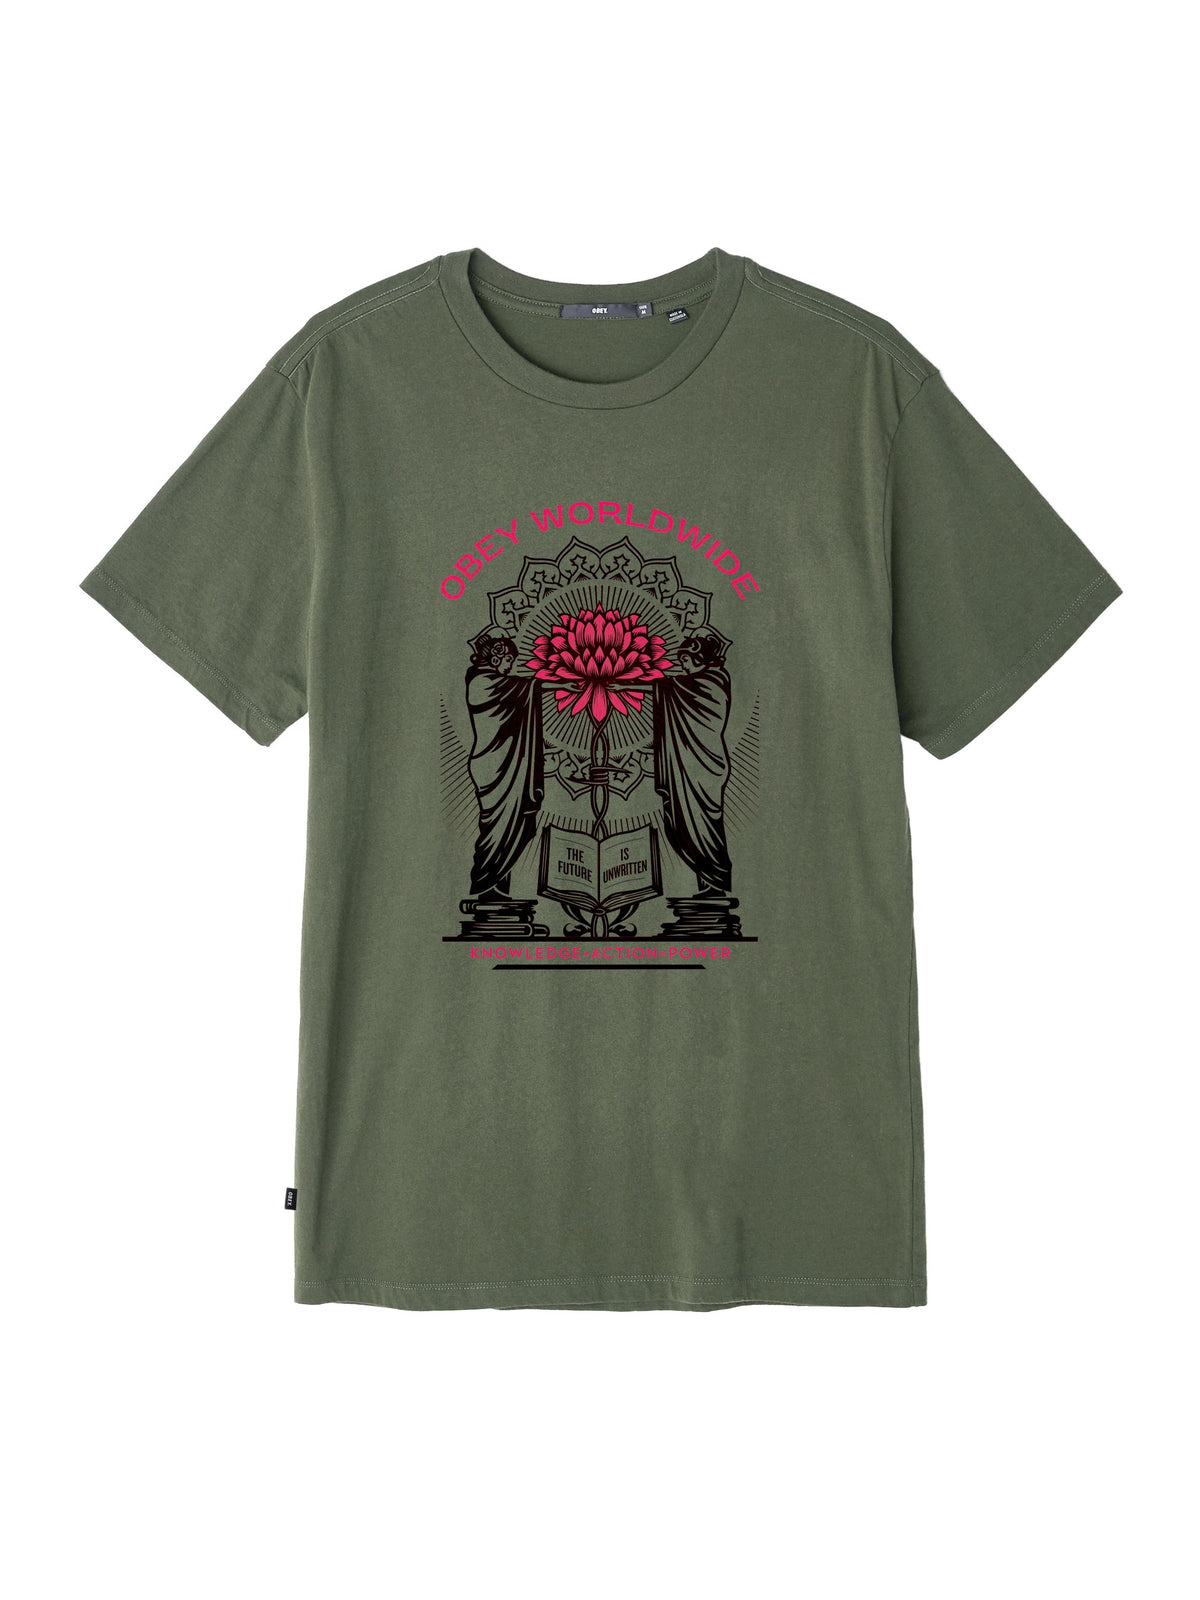 OBEY - Knowledge + Action Men's Superior Tee, Steel Green